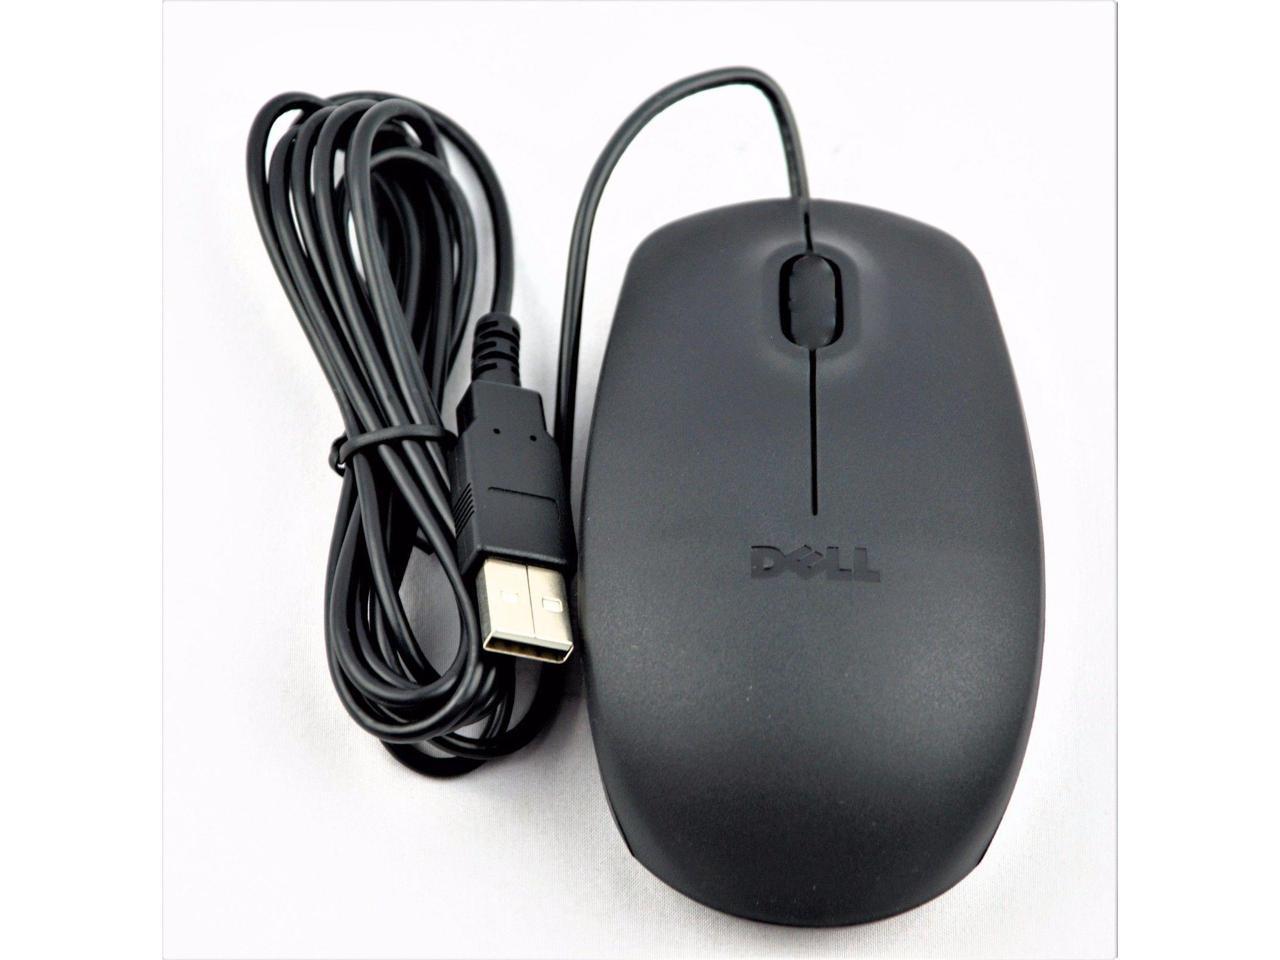 dell ms111 usb optical mouse driver download